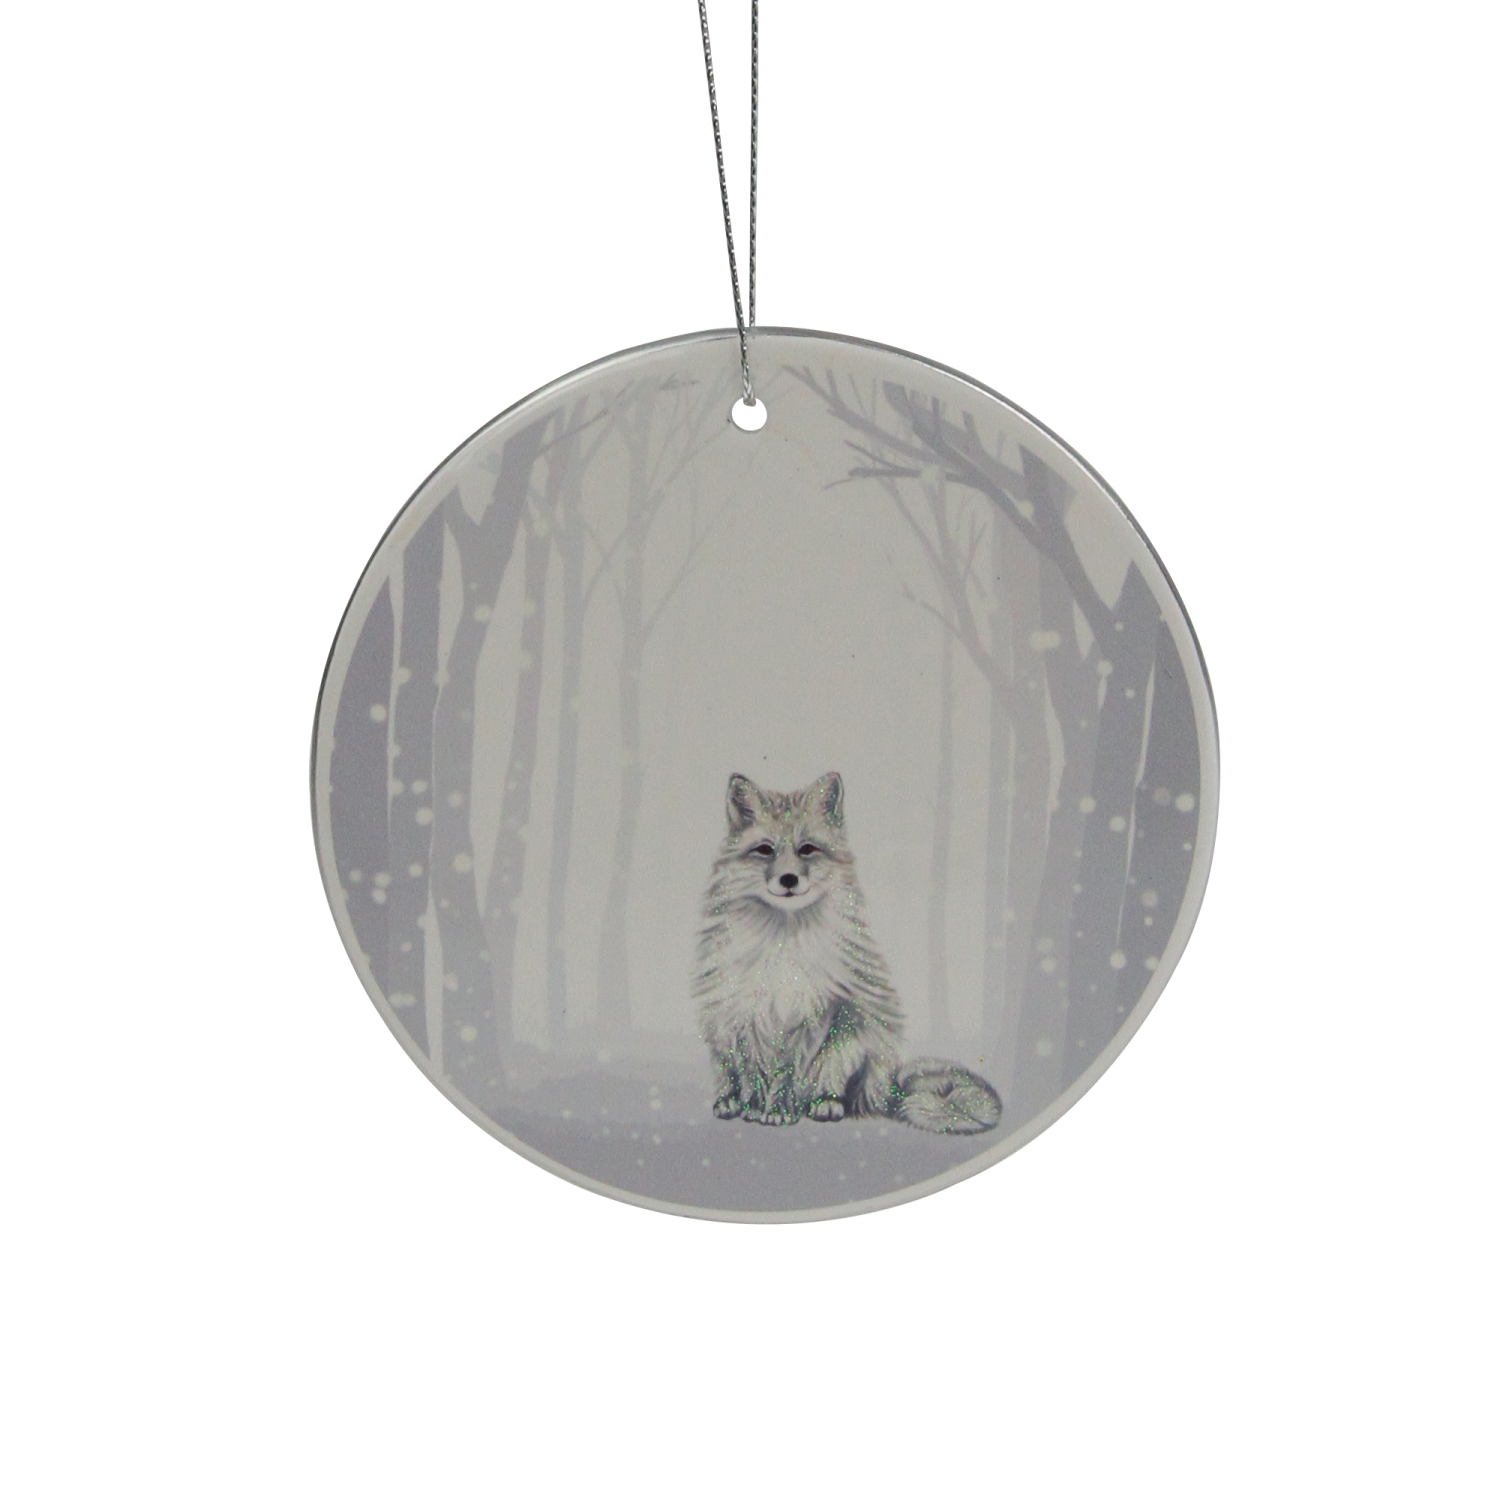 4" White and Silver Arctic Fox Porcelain Disc Christmas Ornament